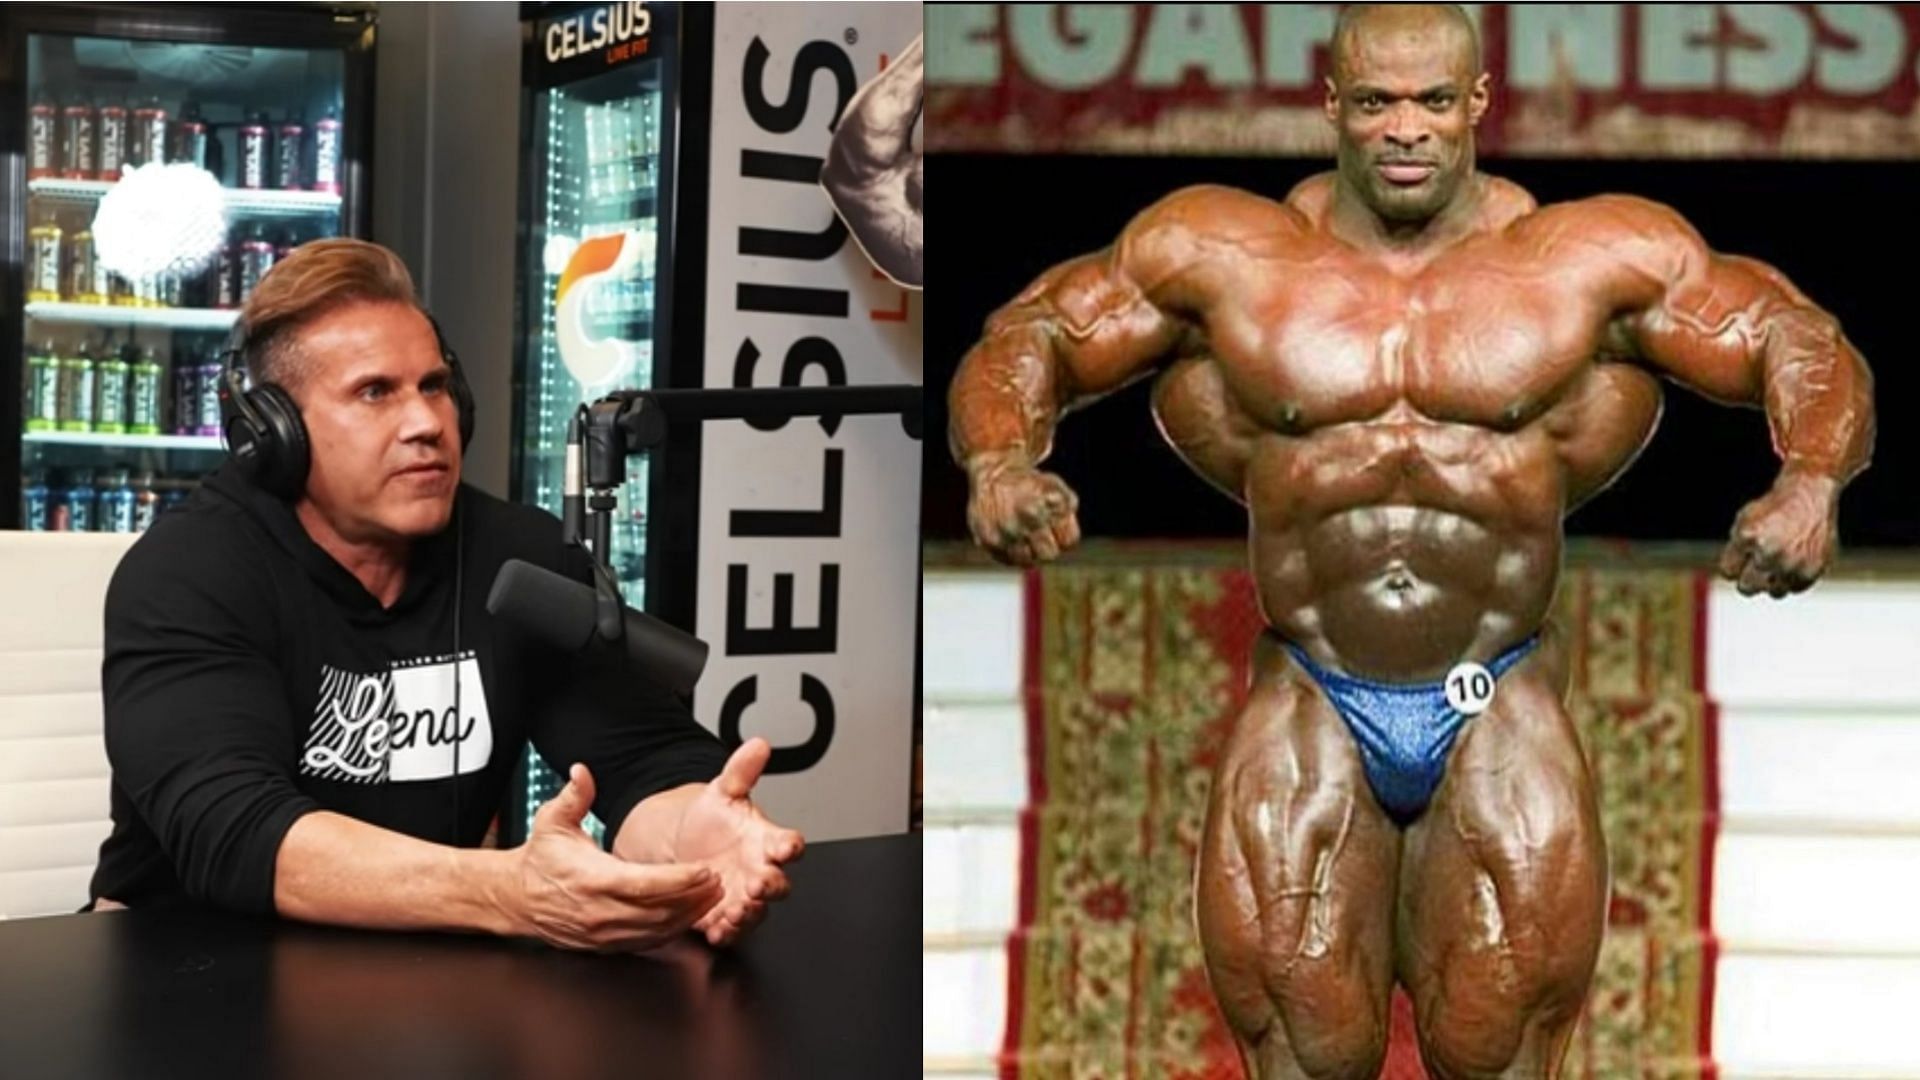 I don't know if anyone has come close' - Jay Cutler believes no one has  surpassed Ronnie Coleman's physique